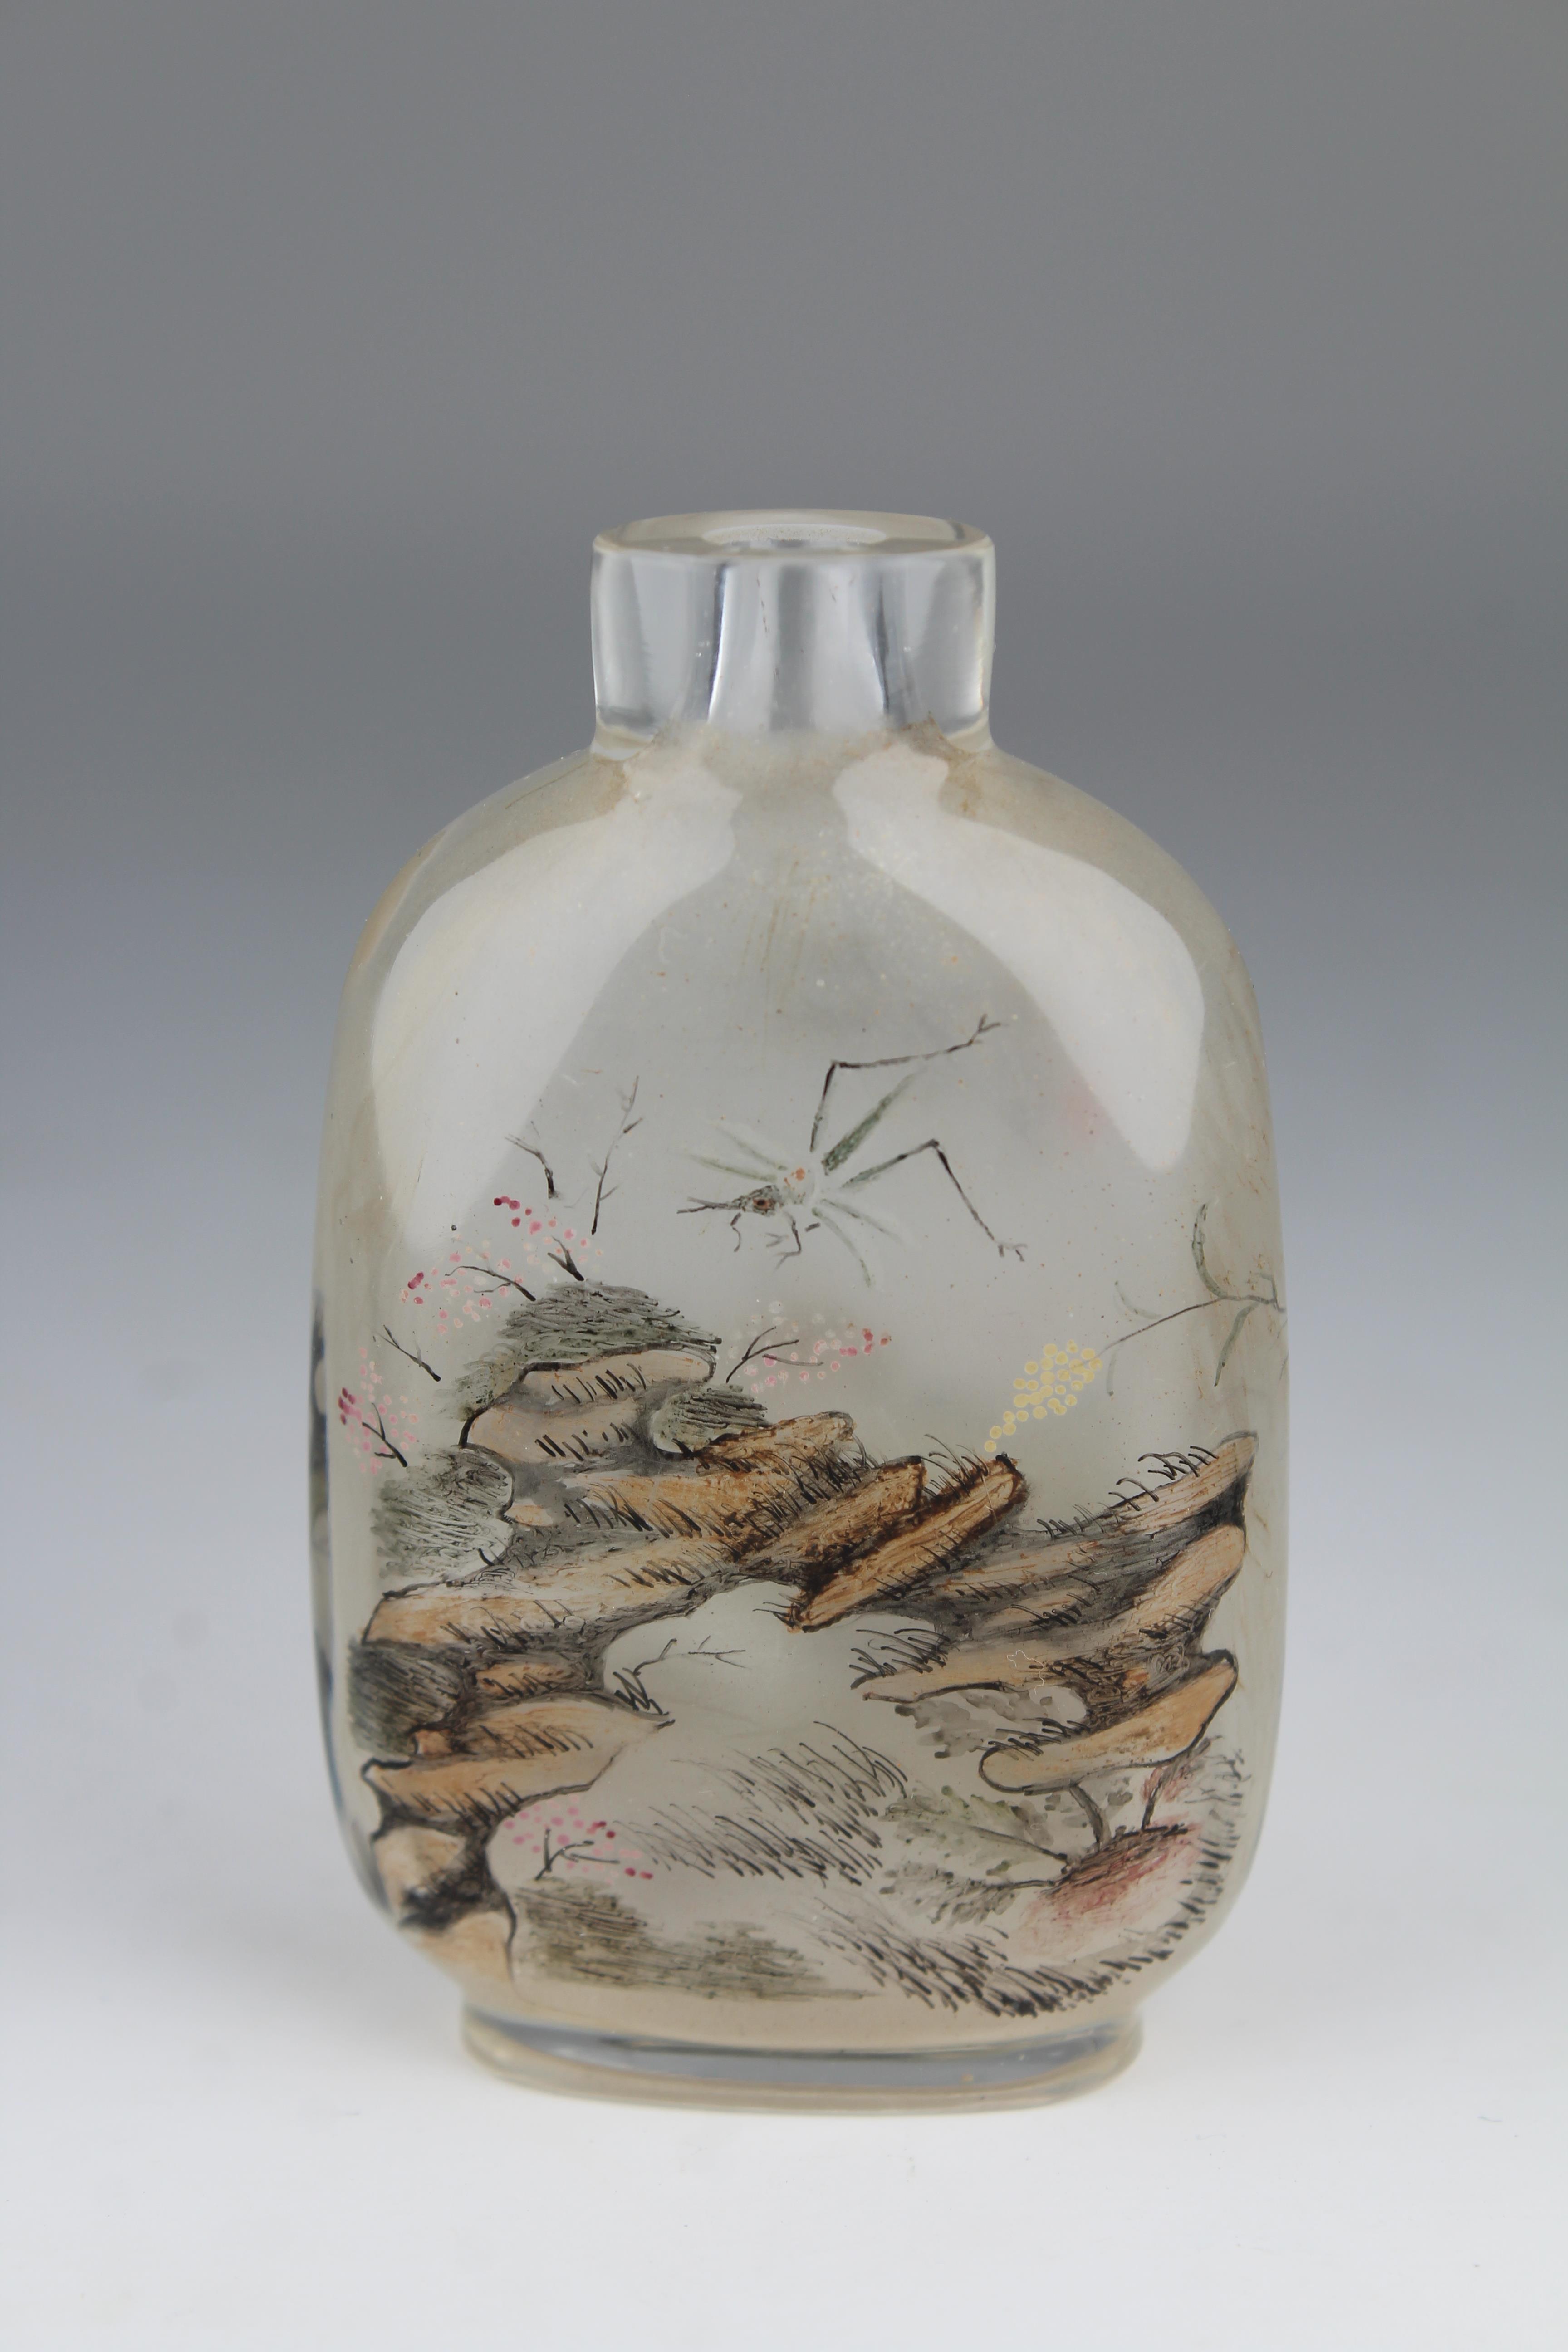 Important 1903 Interior Painted Snuff Bottle - Image 3 of 6